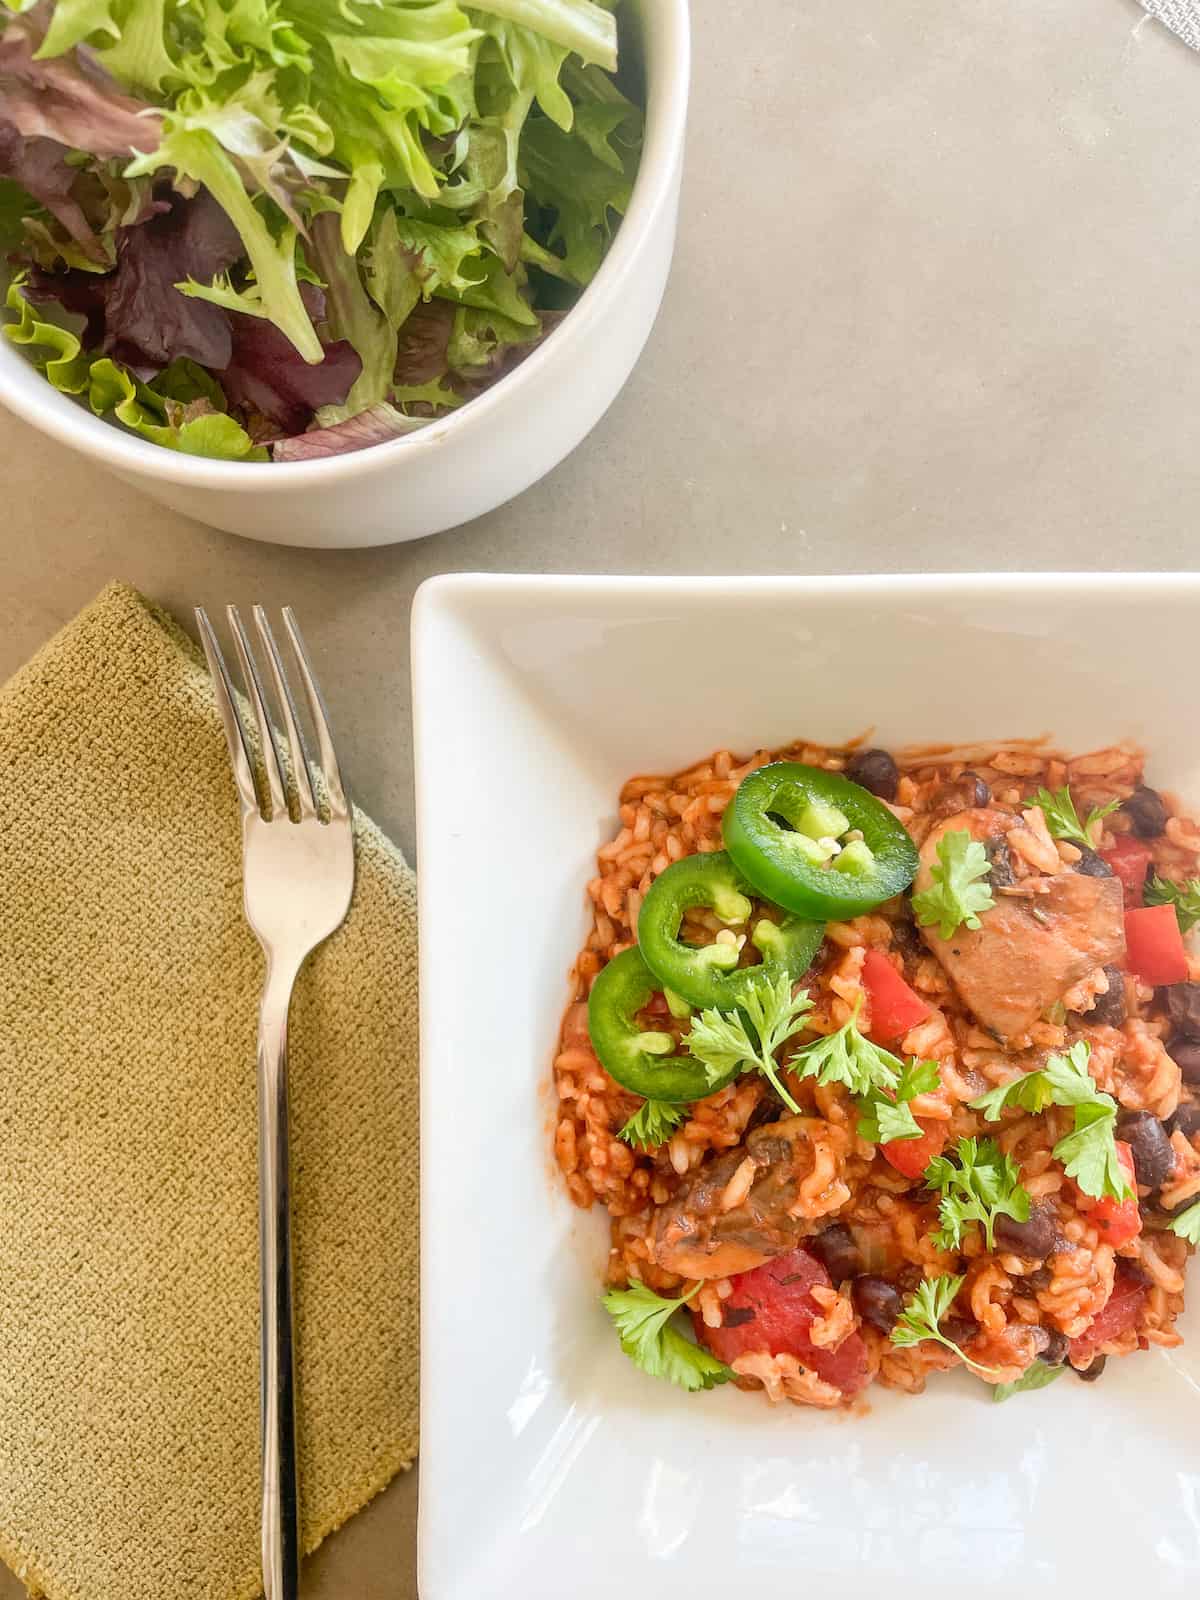 Bowl of Black Bean Jambalaya topped with Jalapeno peppers and parsley. Side salad and a fork.